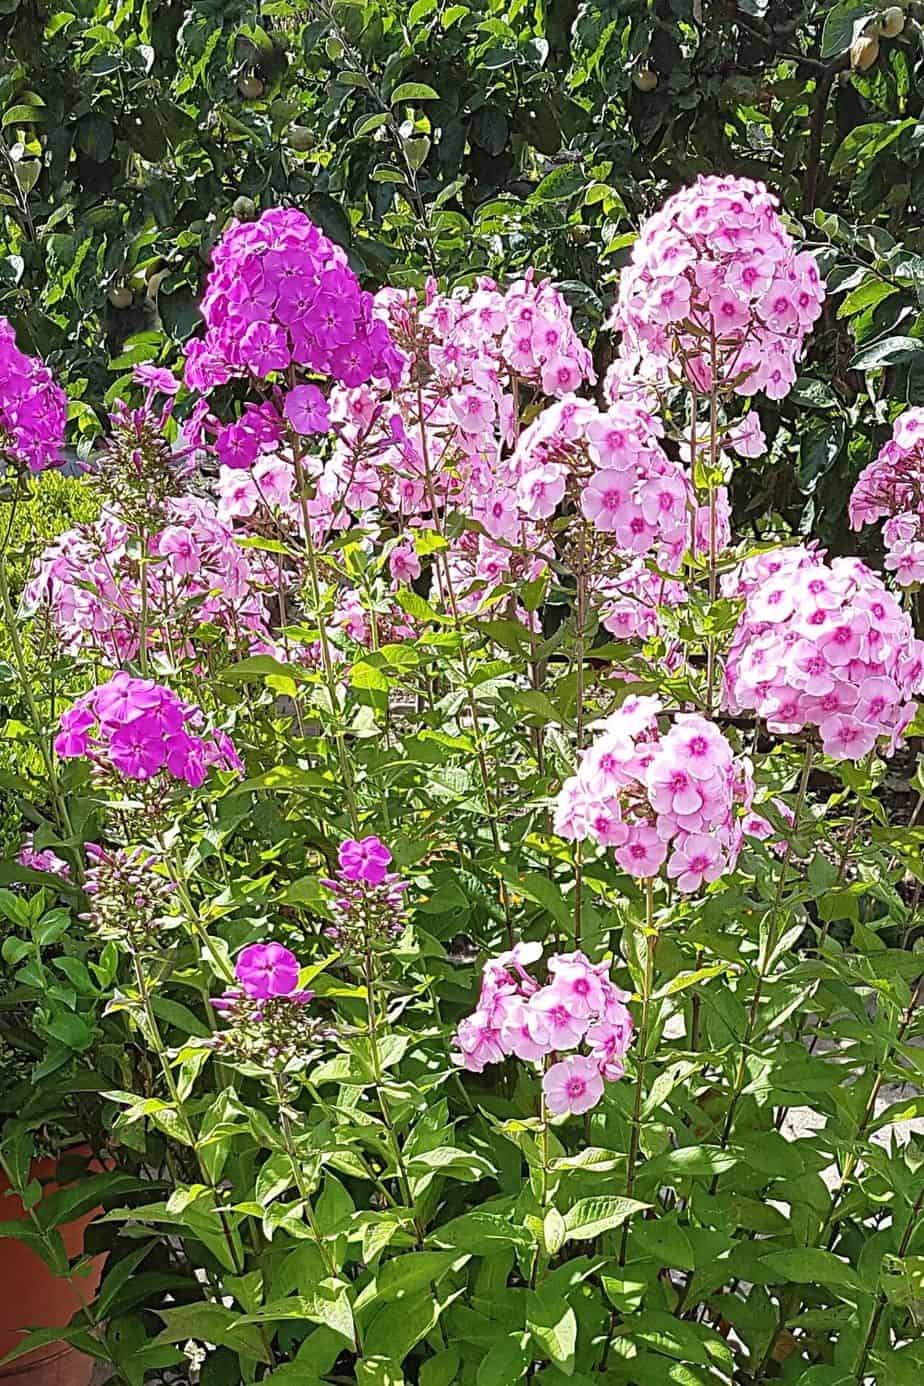 Known for its dark and fragrant aroma, the best place for Phlox paniculata to grow in is in northwest-facing gardens, particularly at the edge of the garden windows